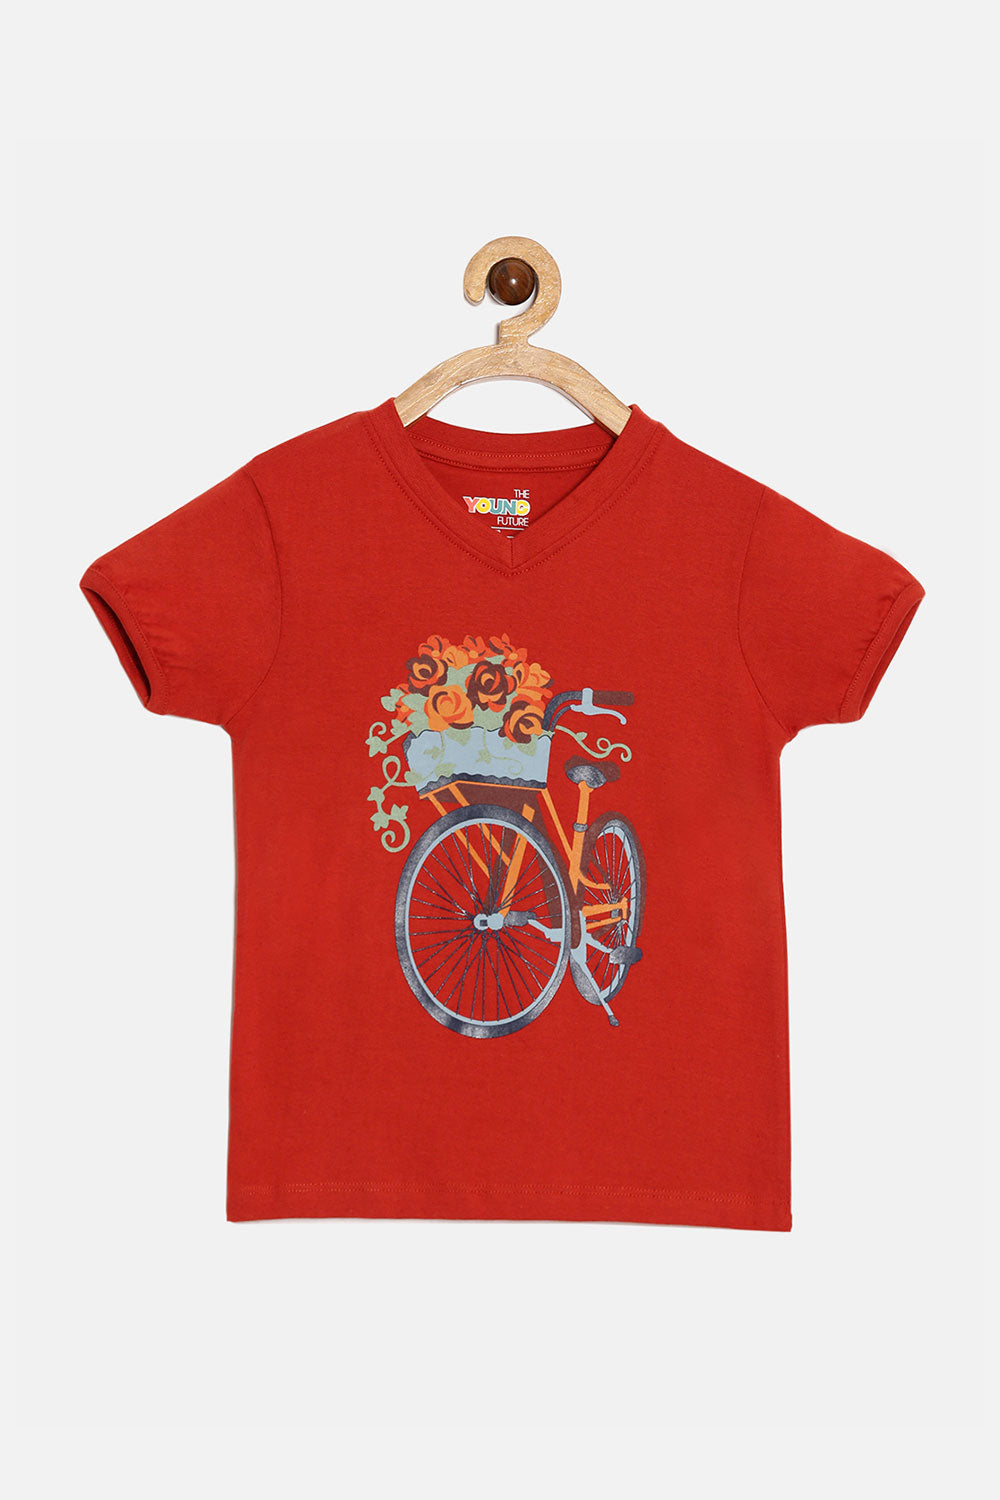 The Young Future Girls T-shirt - Tomato Red - SG11